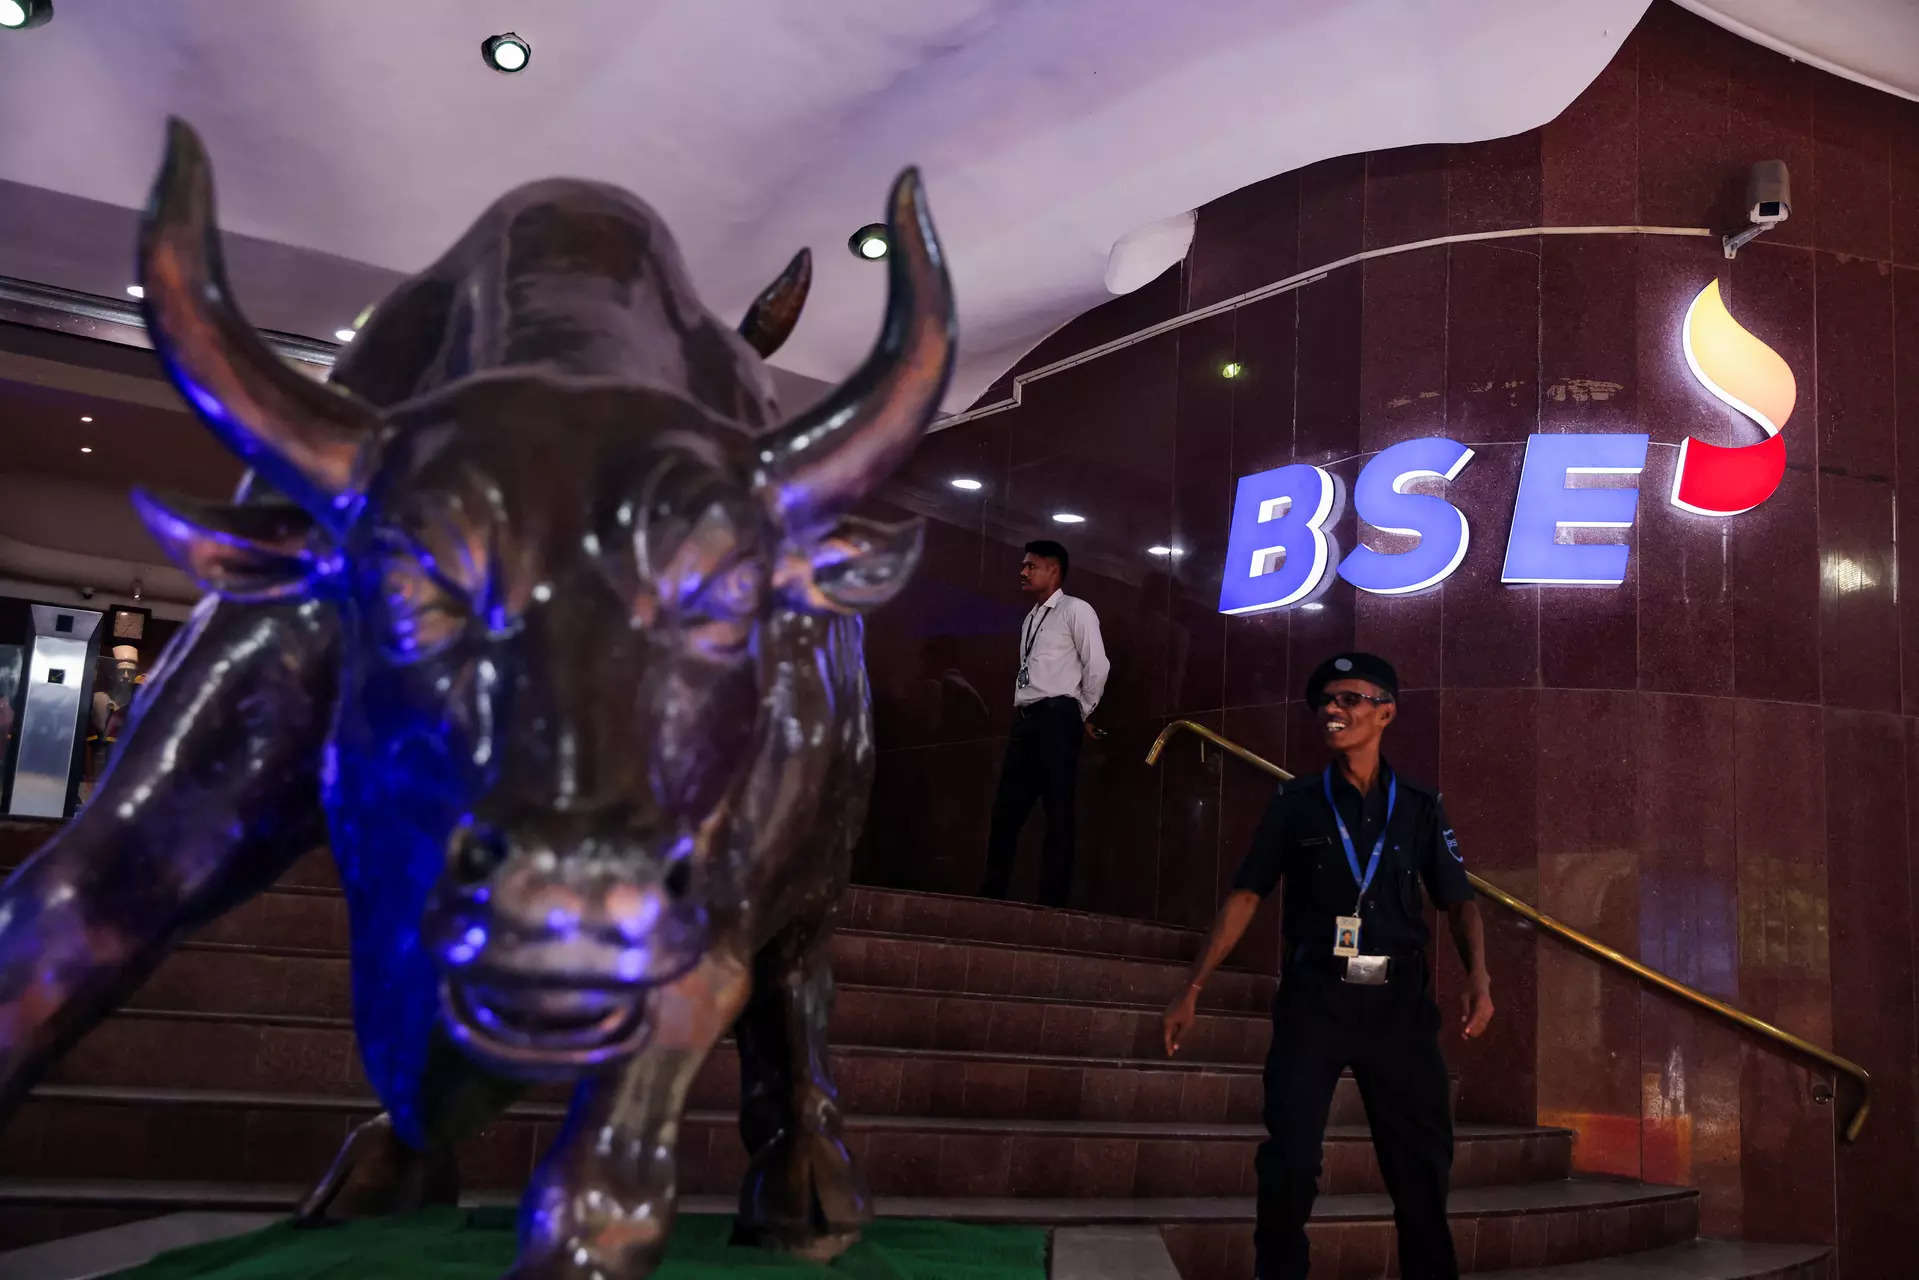 riding on the digitization of indian capital markets! jefferies initiates 'buy' on bse. sees 24% upside